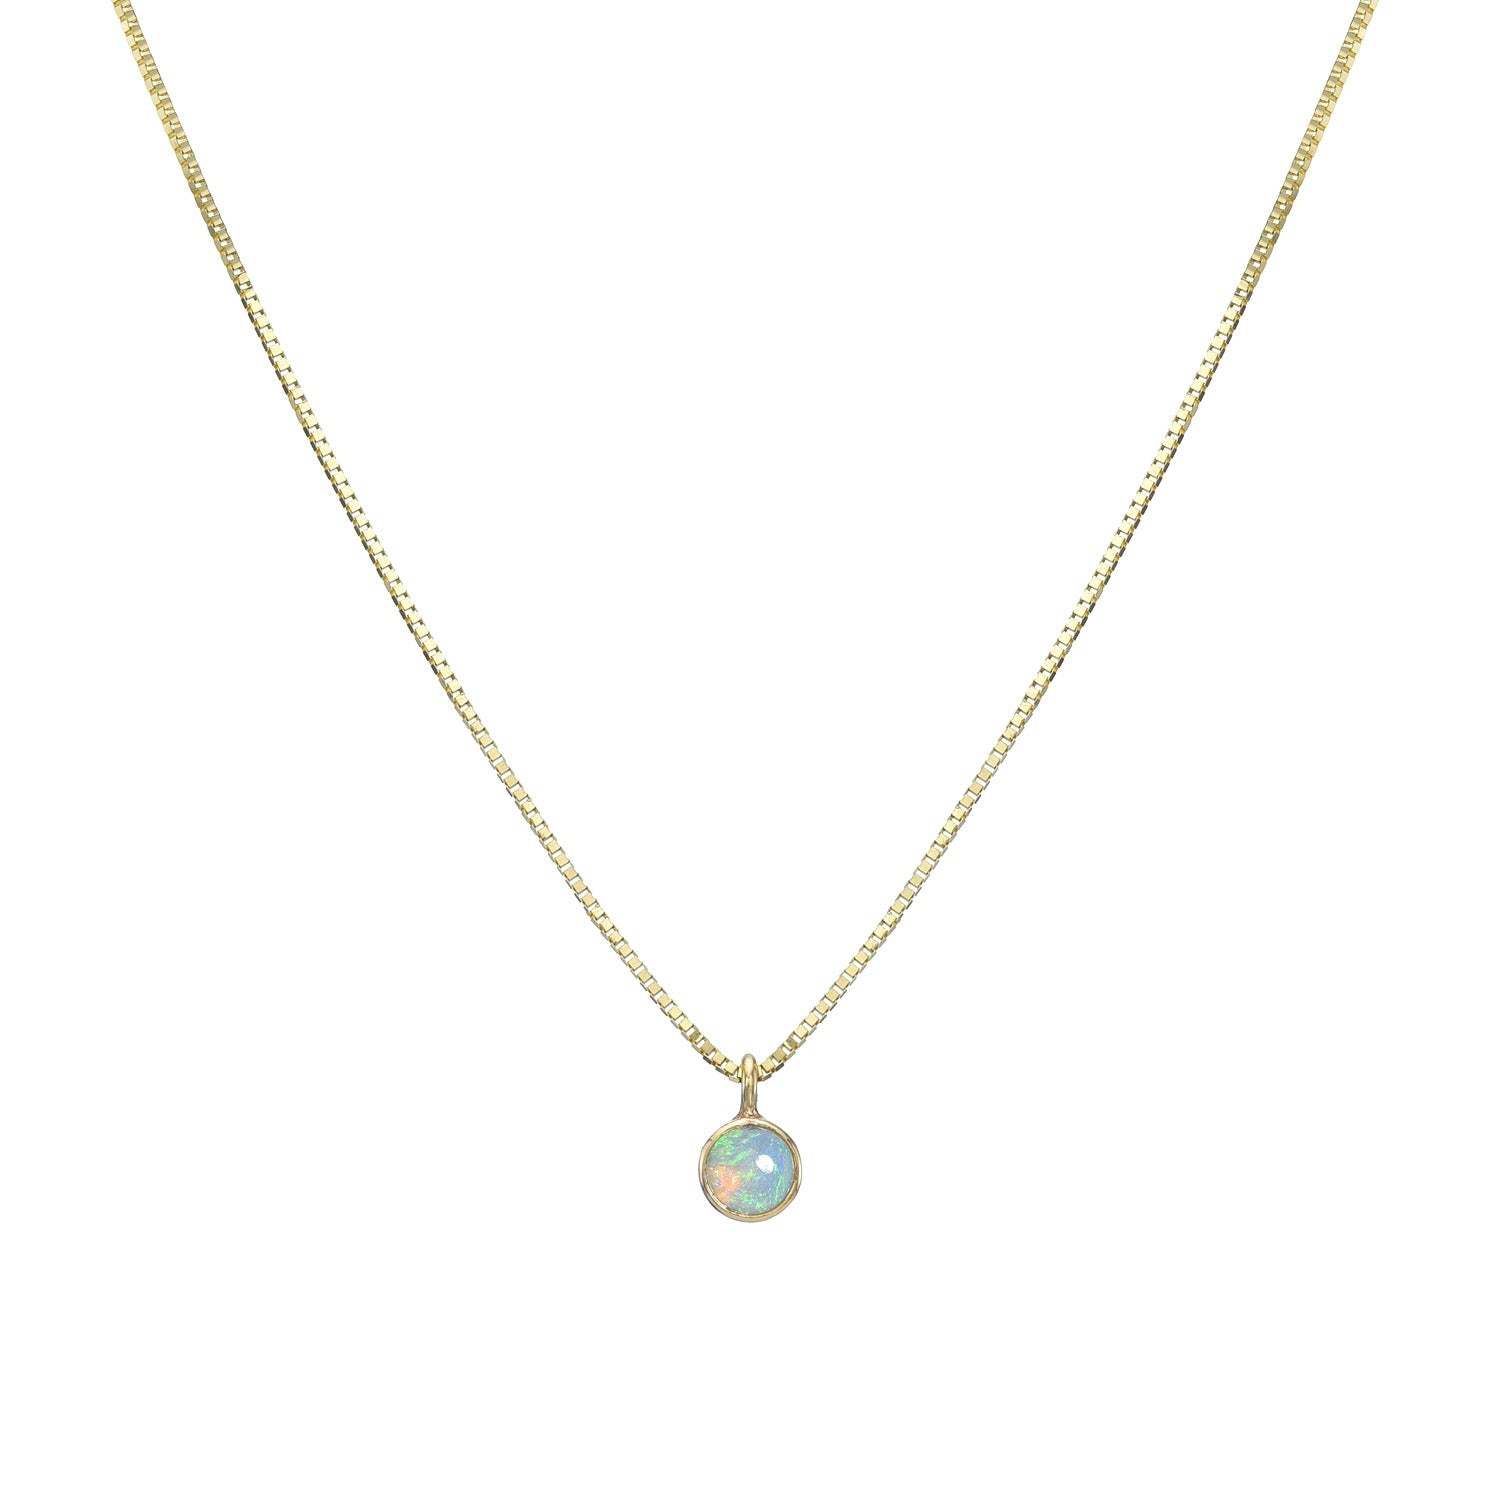 An Australian Opal Necklace by NIXIN Jewelry hangs in front of a white backdrop. The opal necklace pendant is made in 14k yellow gold with a Crystal Opal.